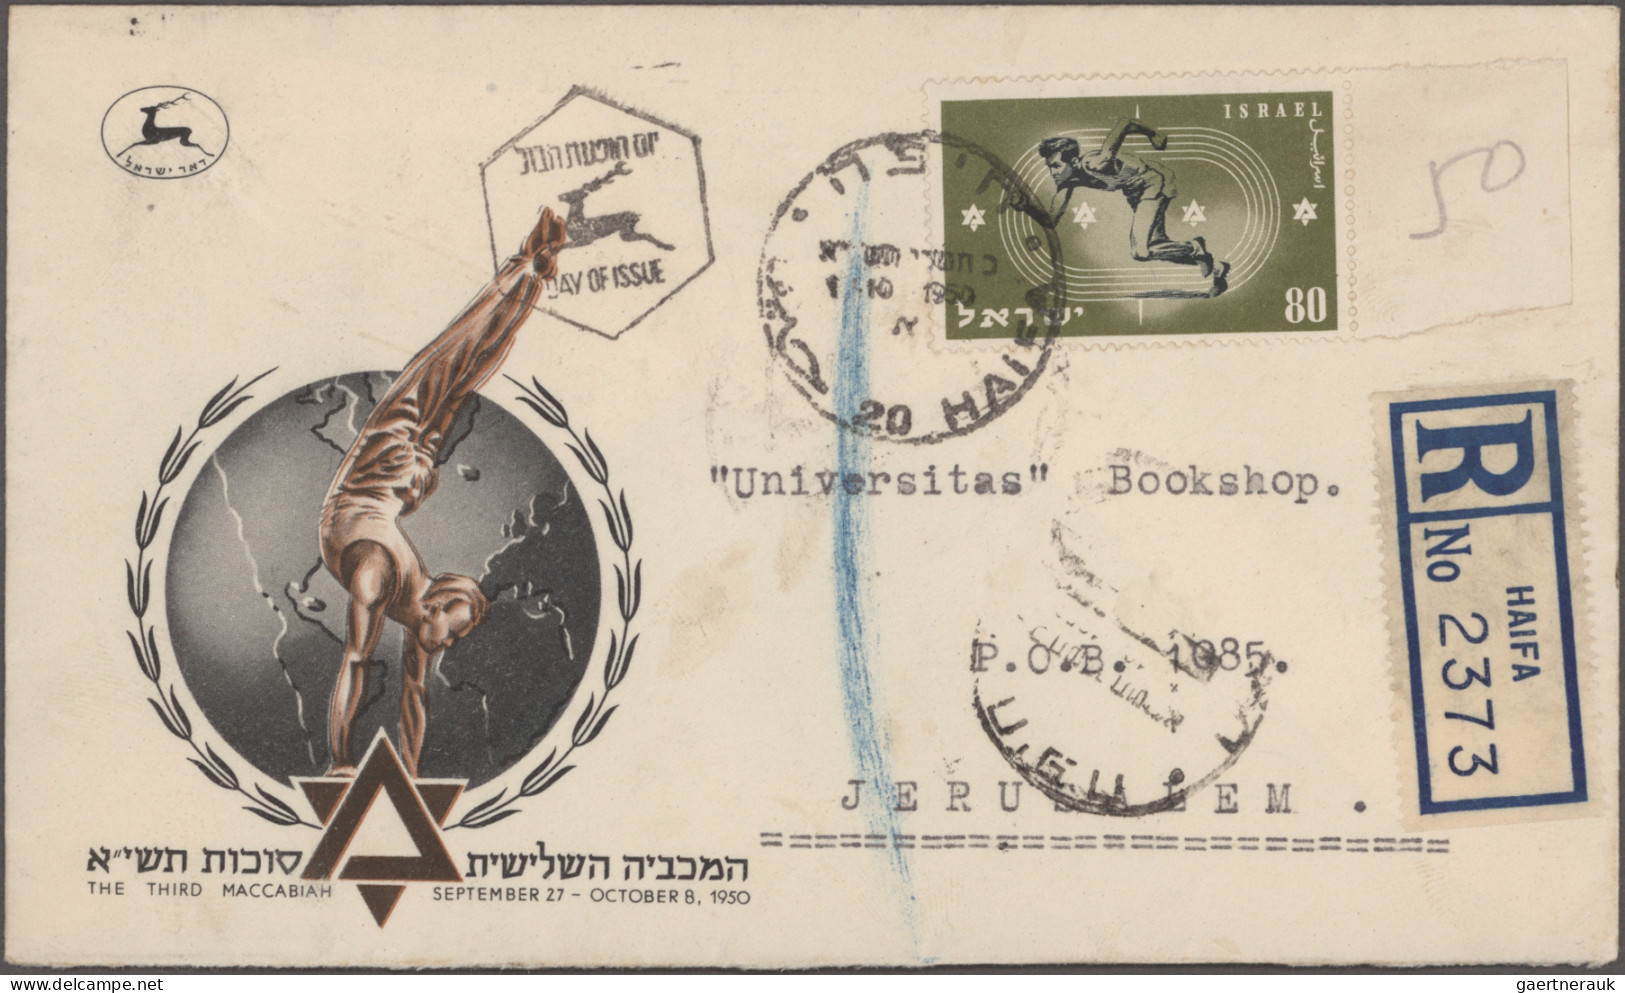 Israel: 1948/1993, collection/accumulation of apprx. 430 covers (f.d.c./commemor